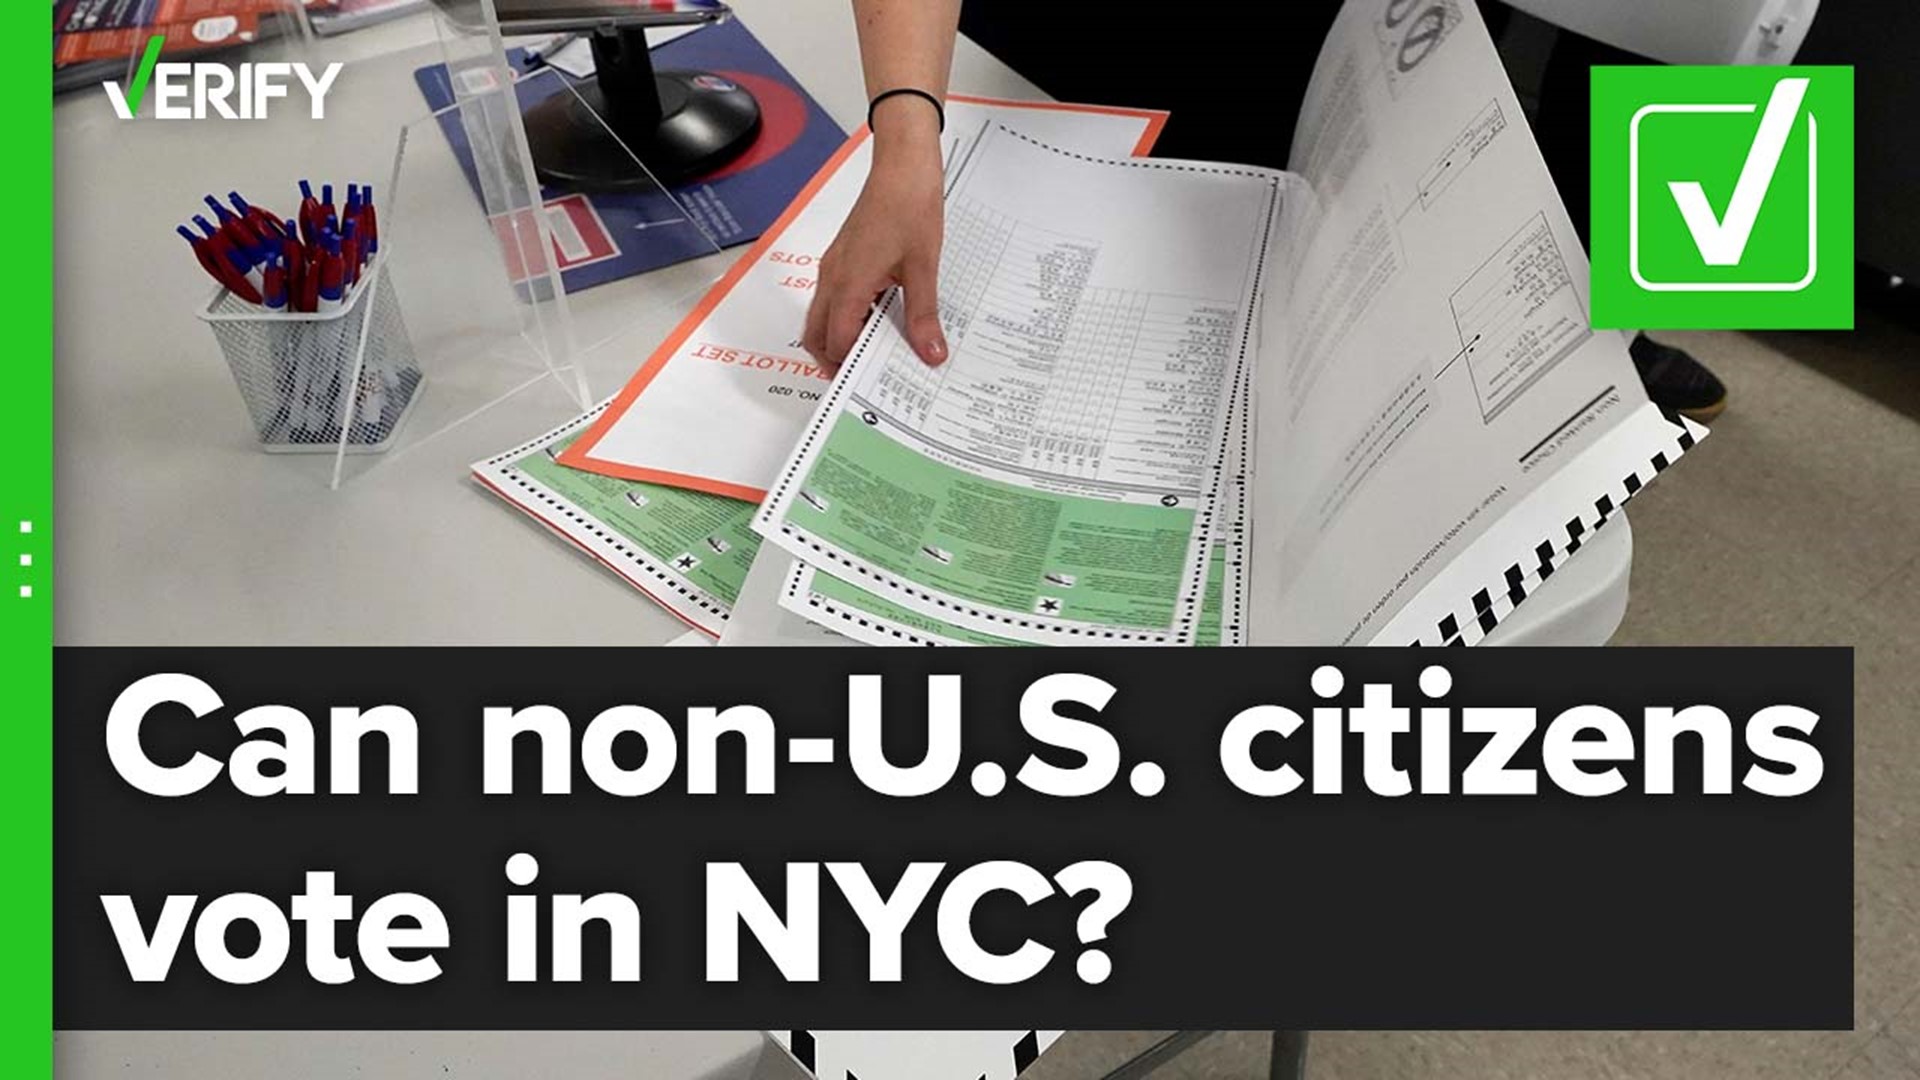 In total, there are 15 cities that allow some noncitizens to vote. Those cities are located in California, Maryland, New York and Vermont.